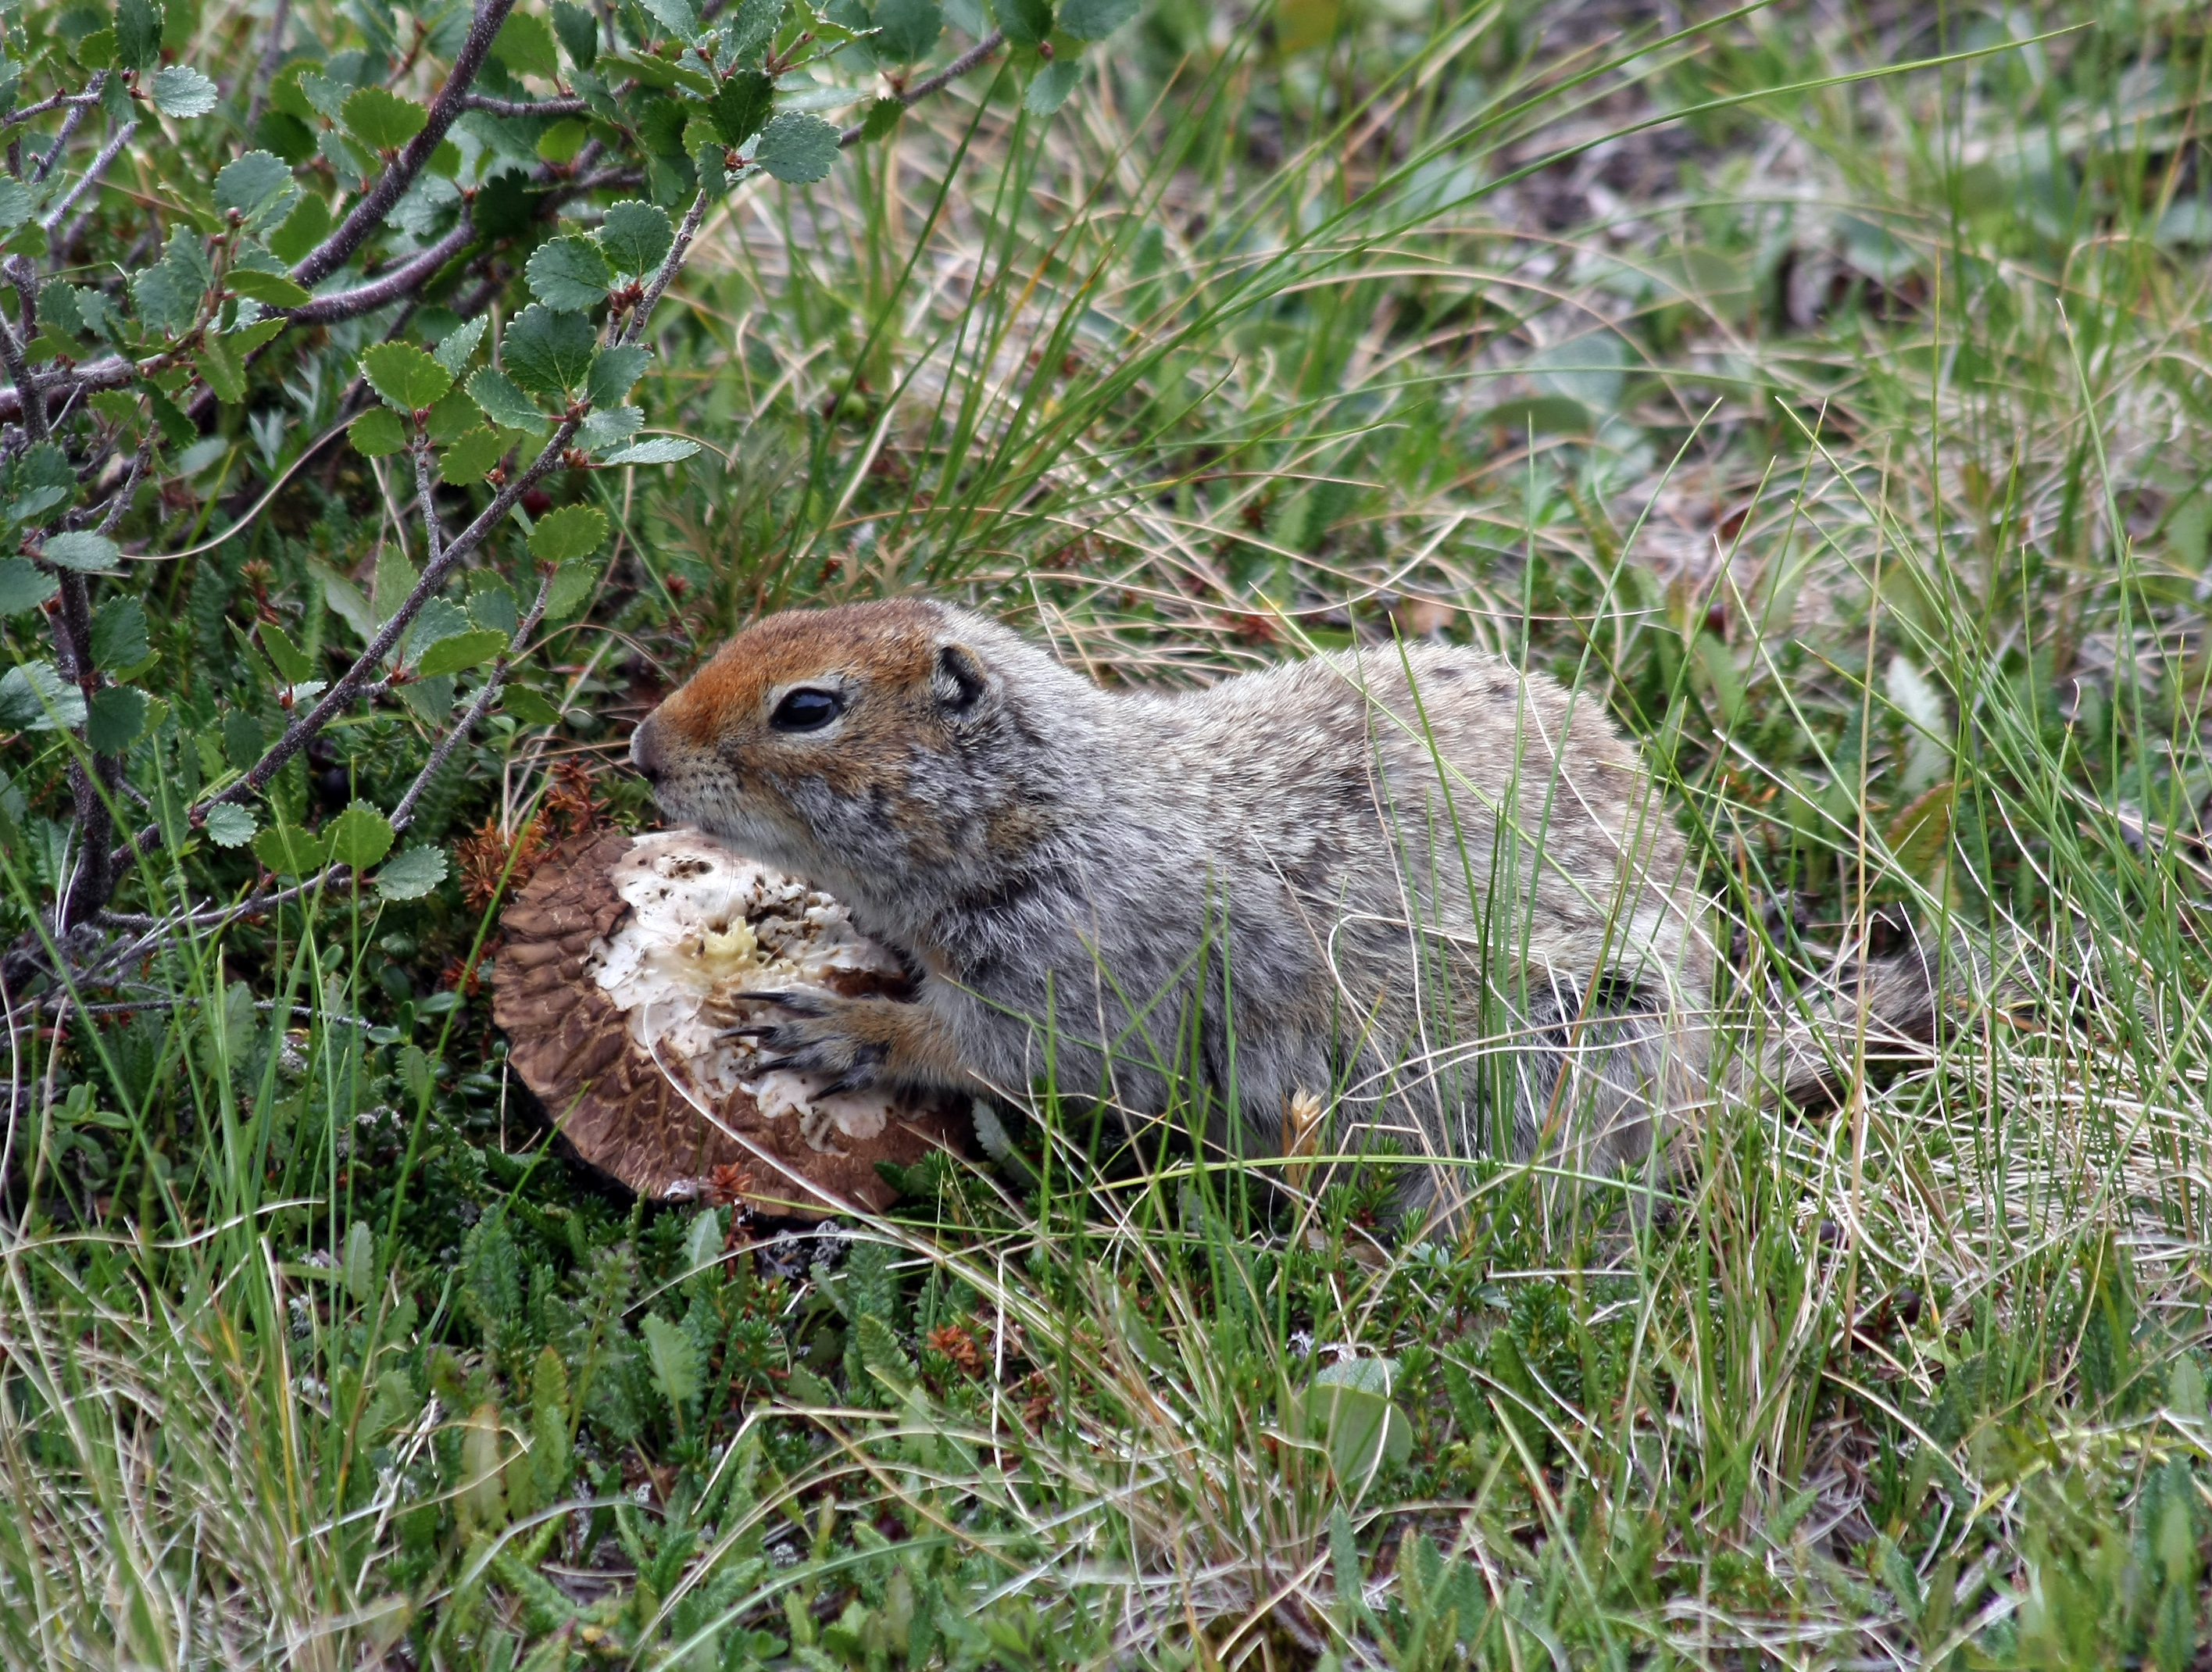 Hibernation periods of Arctic ground squirrels found altered in response to climate change